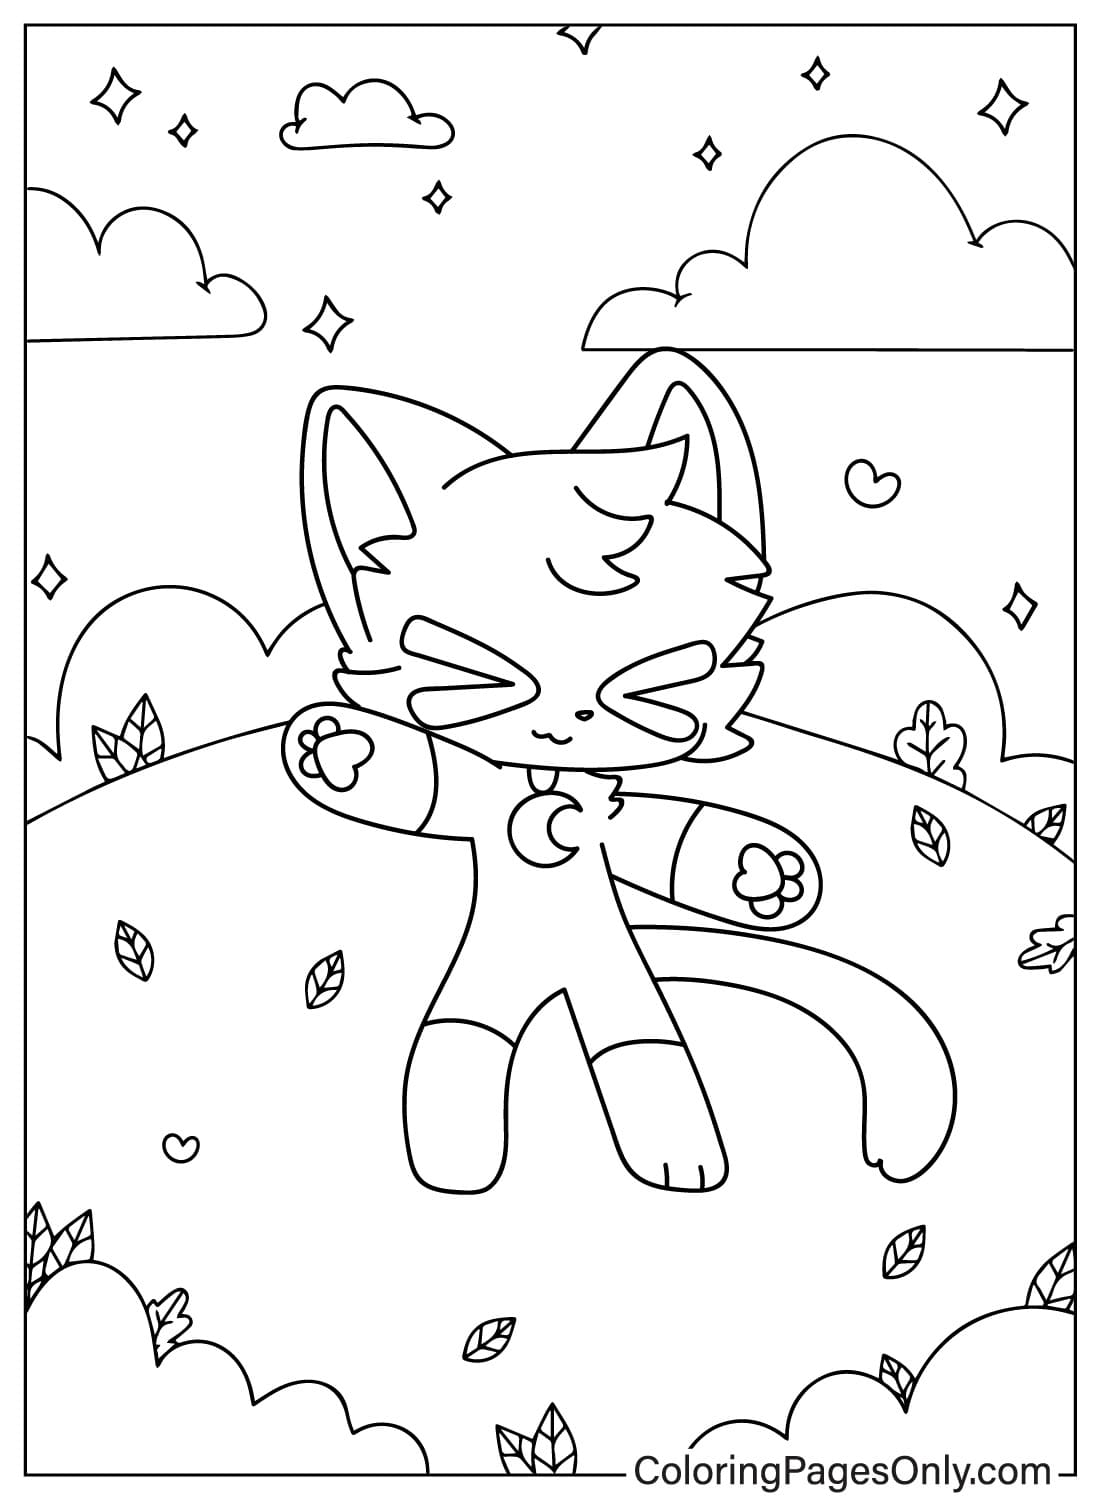 Pictures CatNap Coloring Page from CatNap